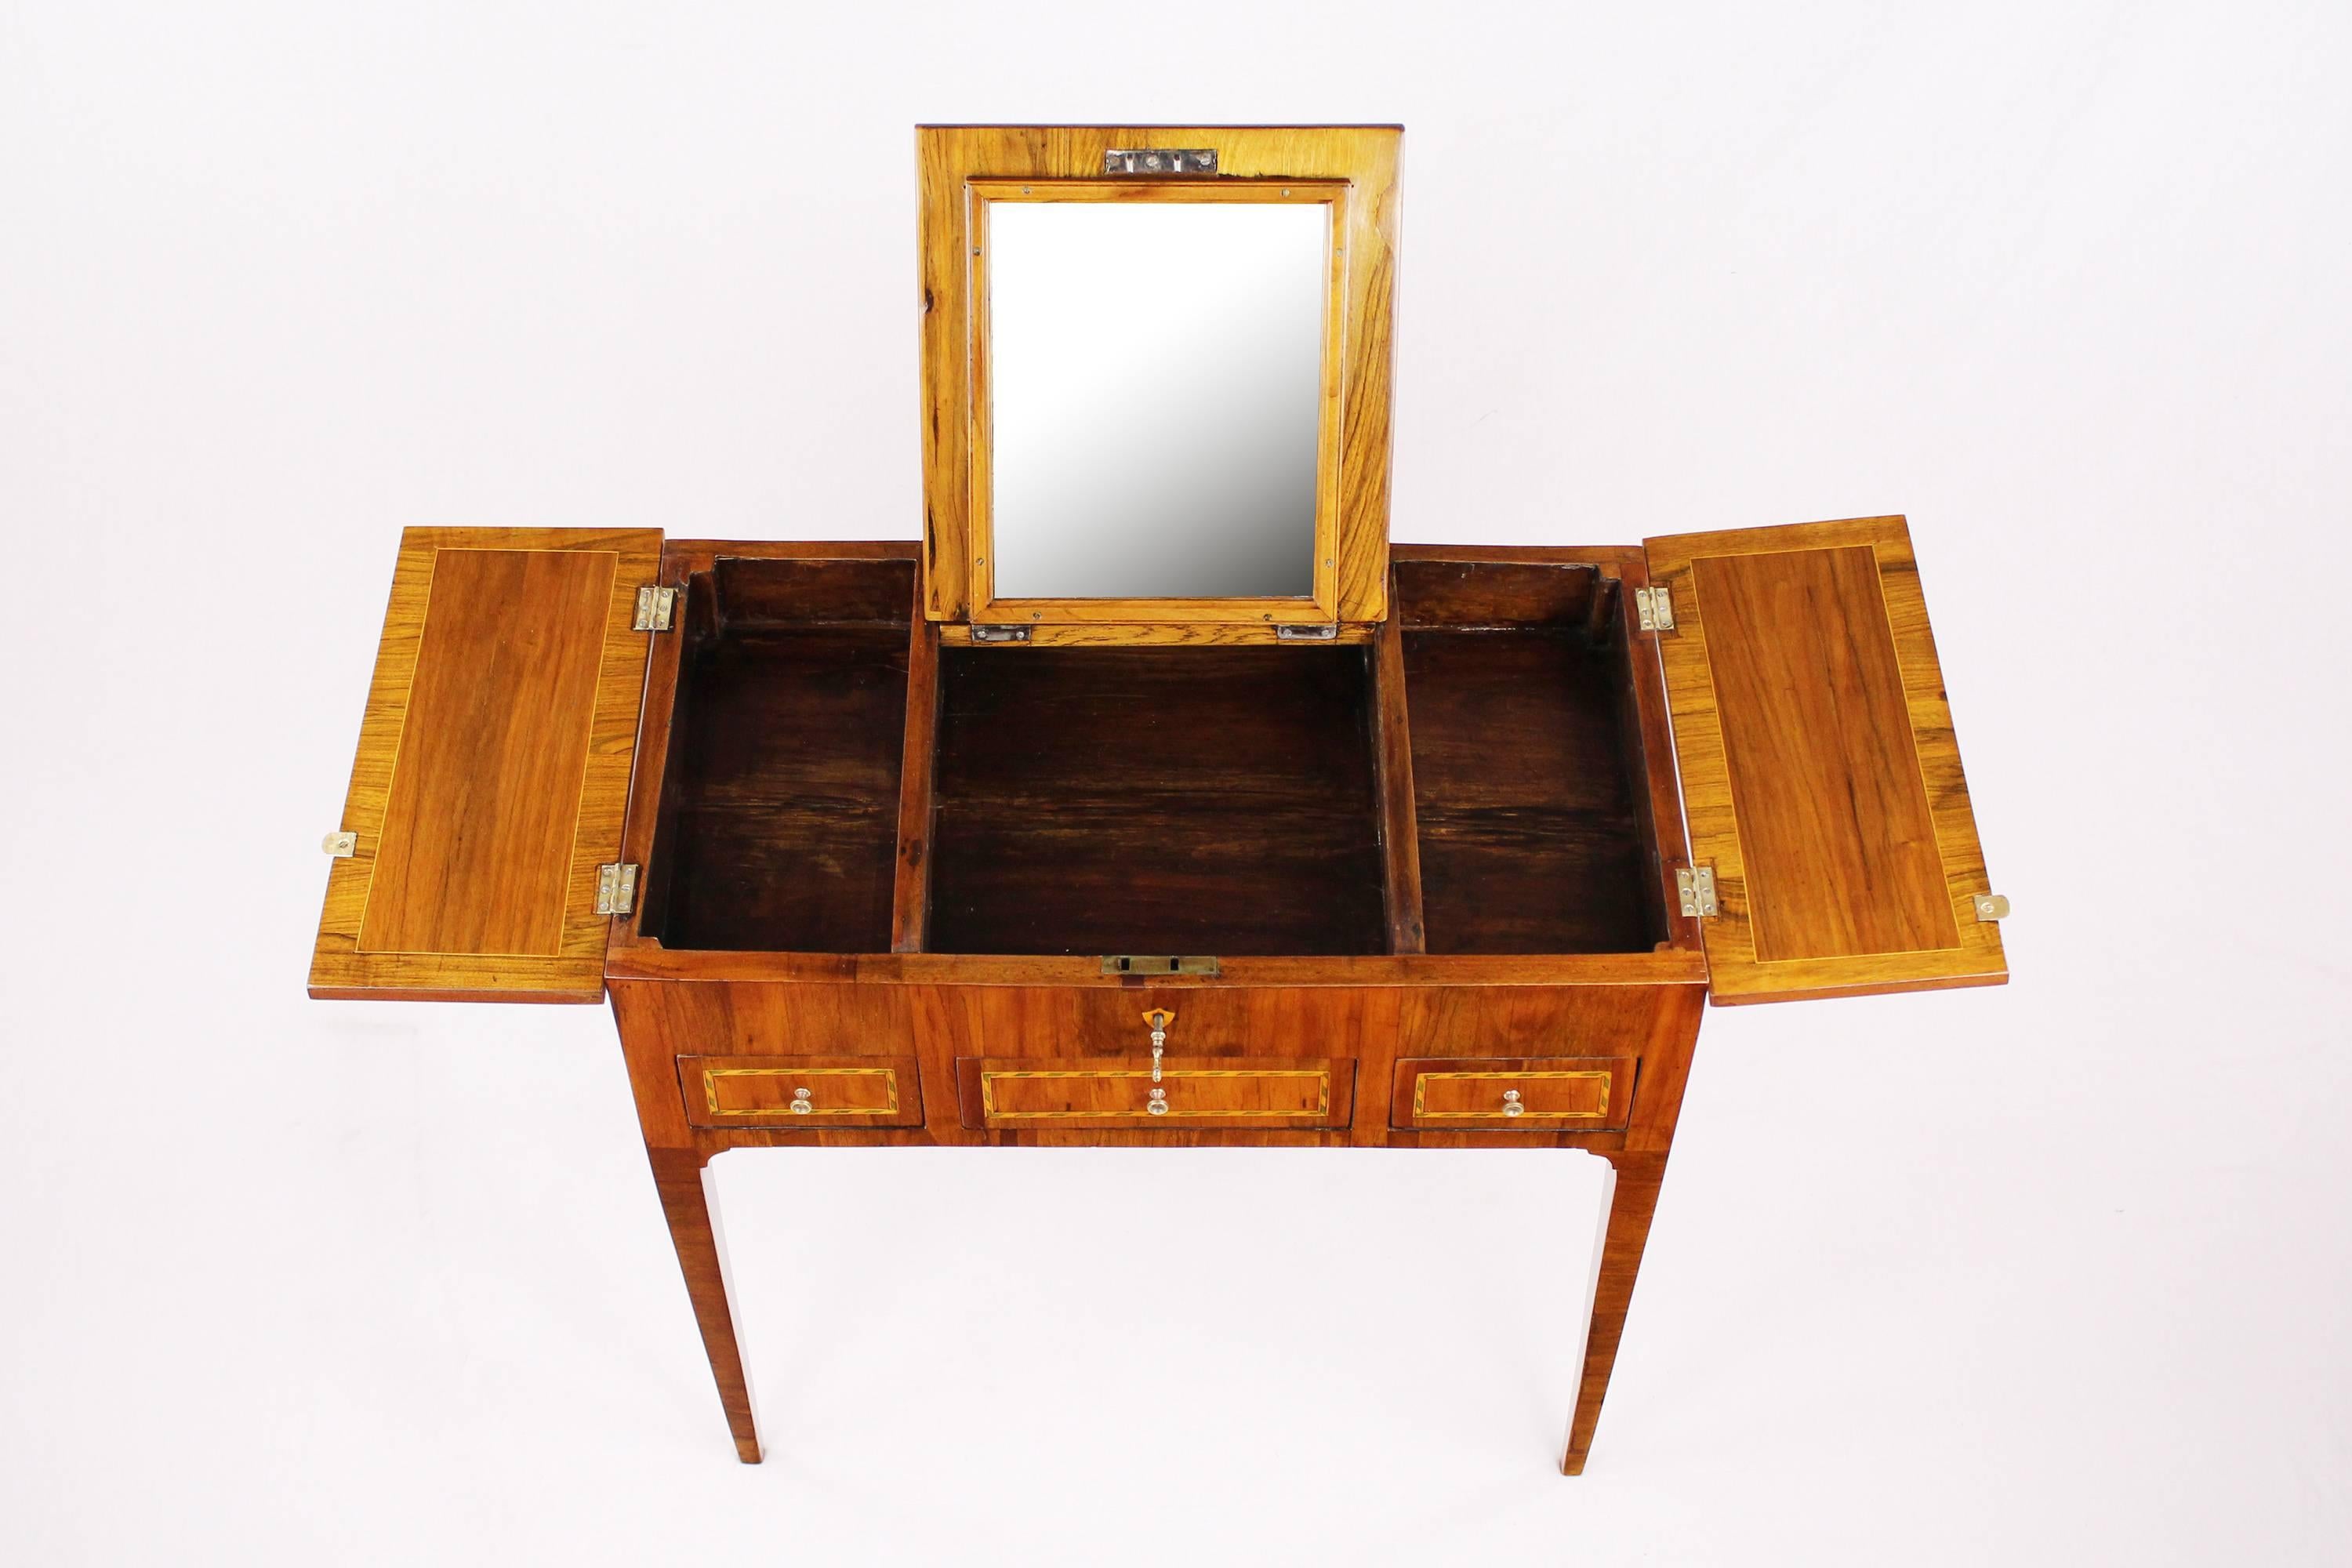 Early 19th Century Dressing Table, Poudreuse, Mahogany Veneered, Marquetry Works (Biedermeier)